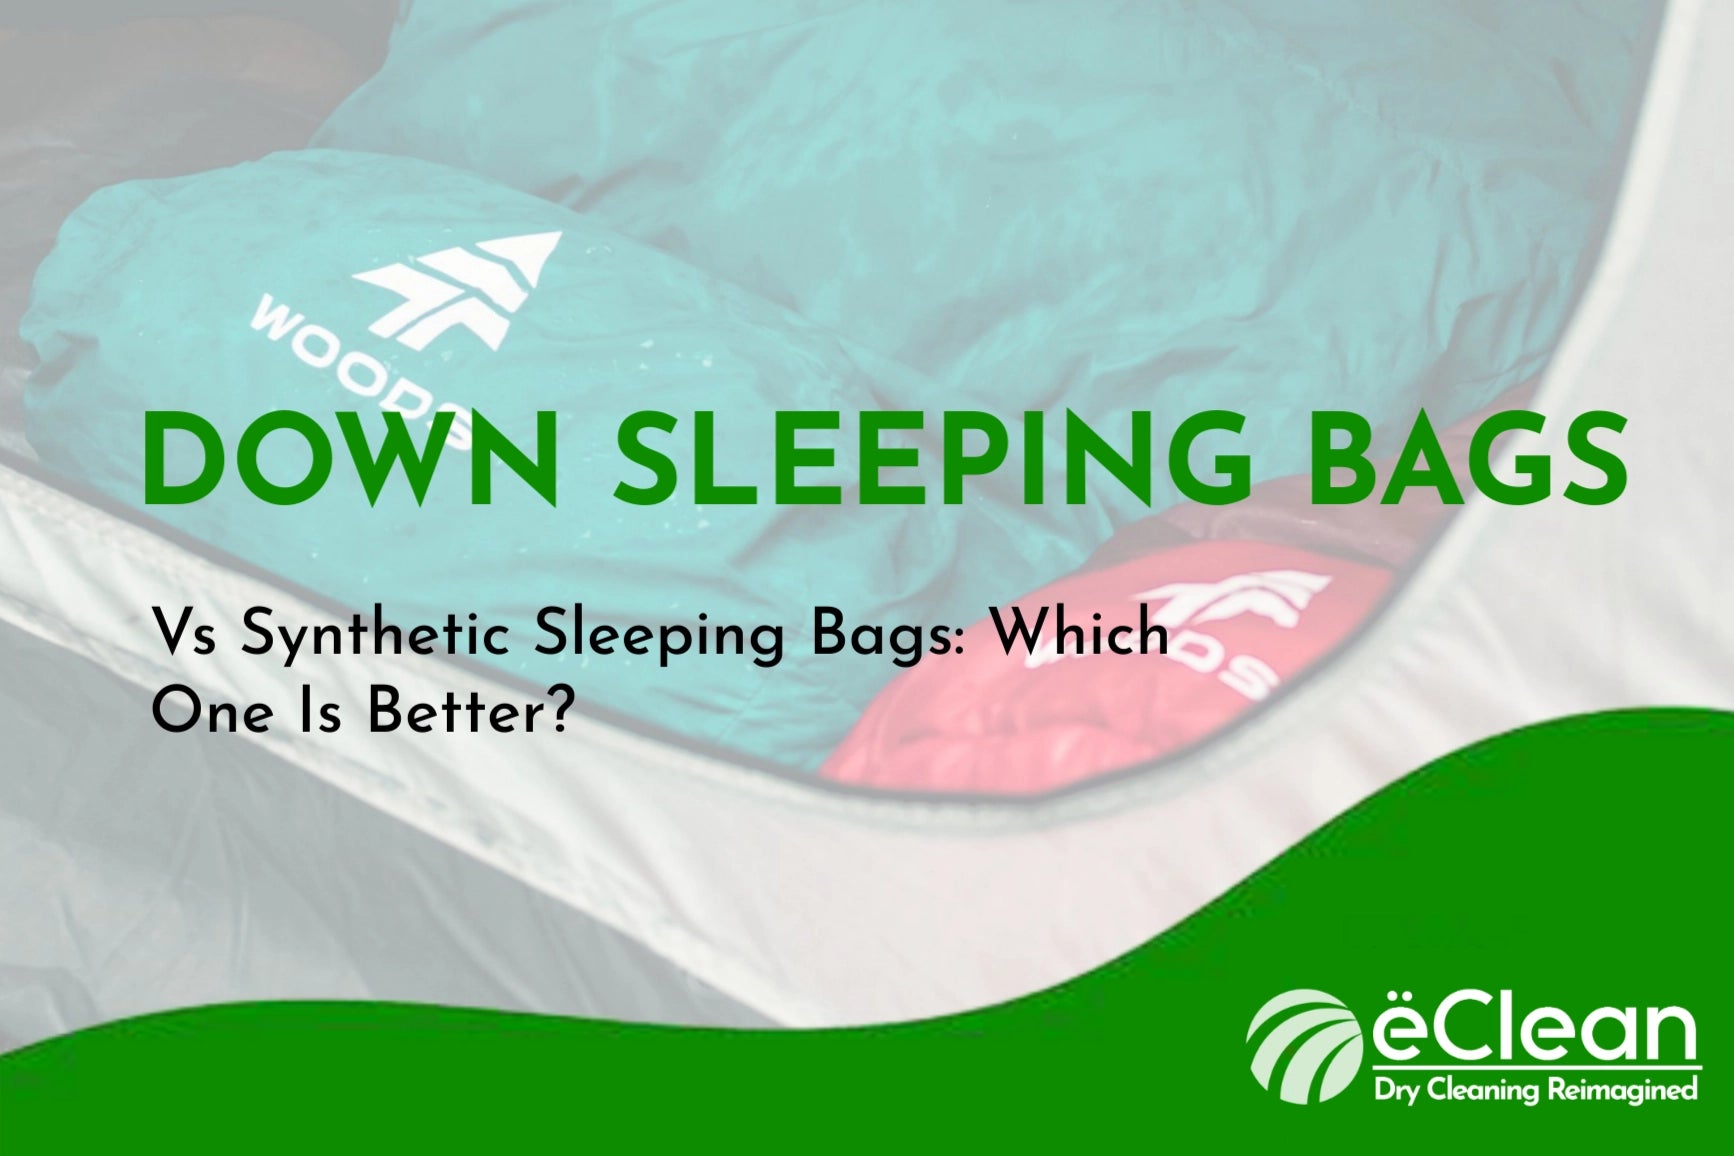 Down Sleeping Bags Vs Synthetic Sleeping Bags: Which One Is Better?